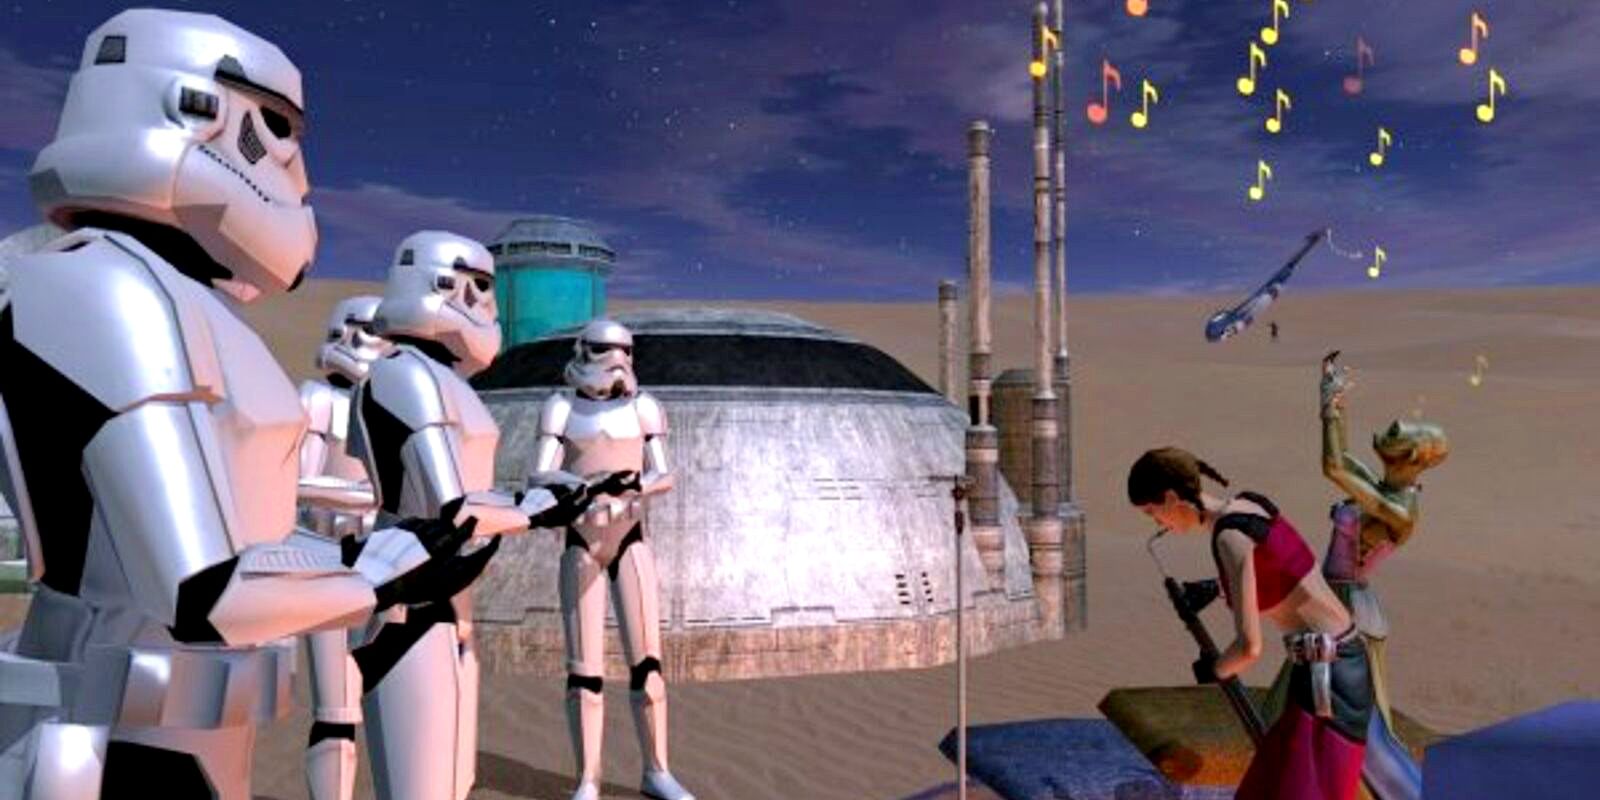 Star Wars Galaxies, the best Star Wars game, can still be played for free.